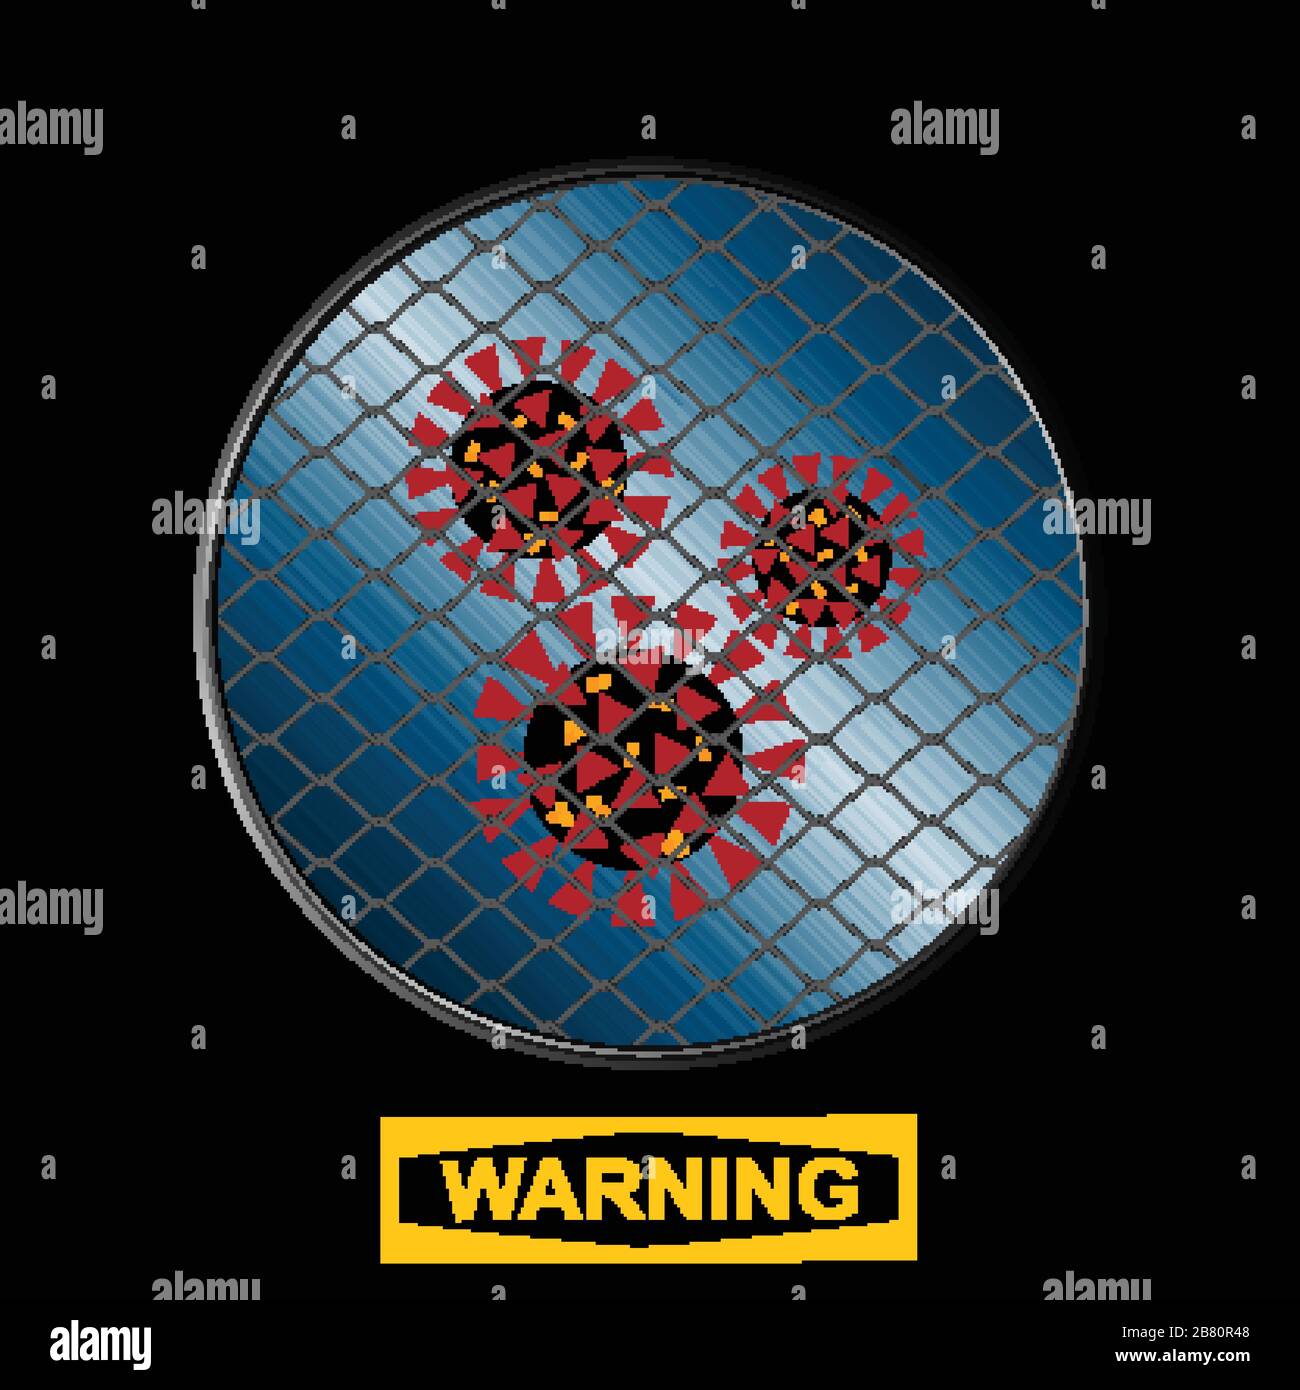 Molecule Of Virus Contained With Metallic Net Inside Circular Border Over Black Background With Yellow Warning Sign Stock Vector